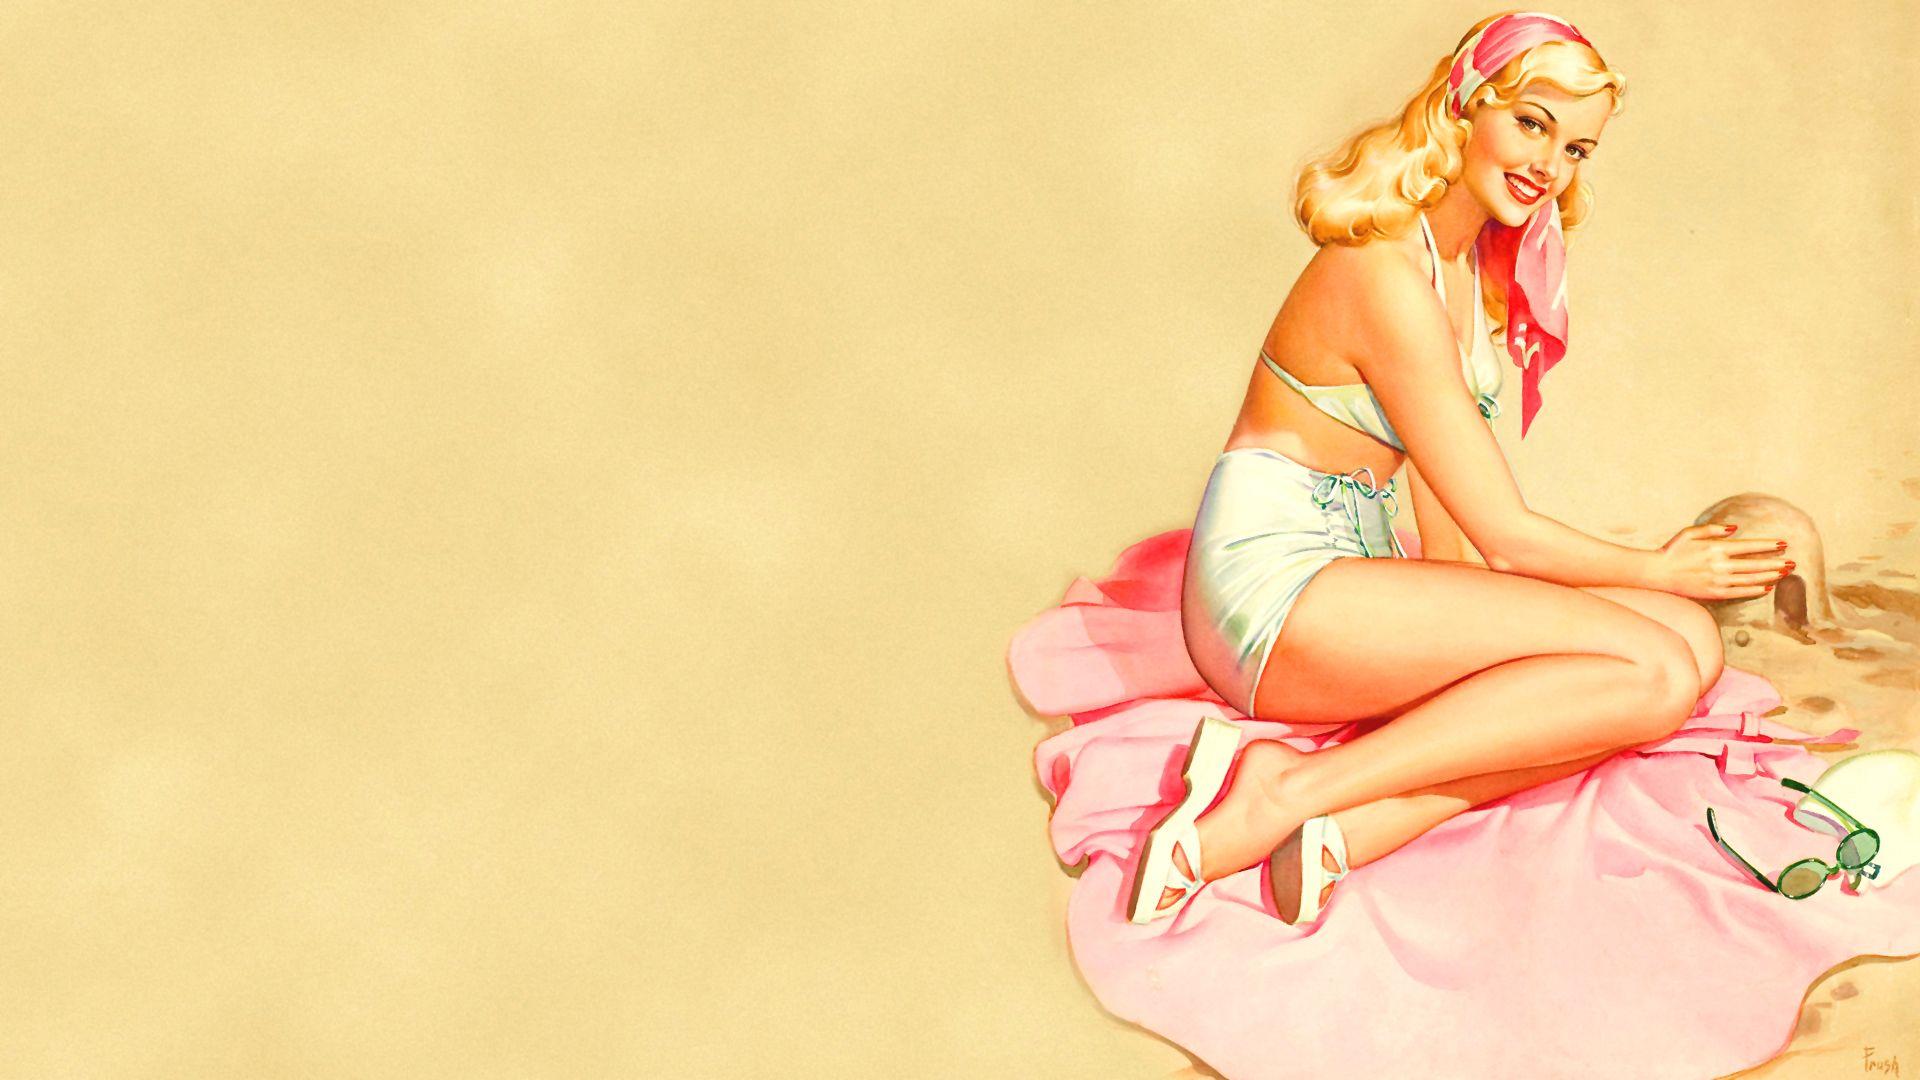 Vintage Pin Up Wallpaper 62 pictures